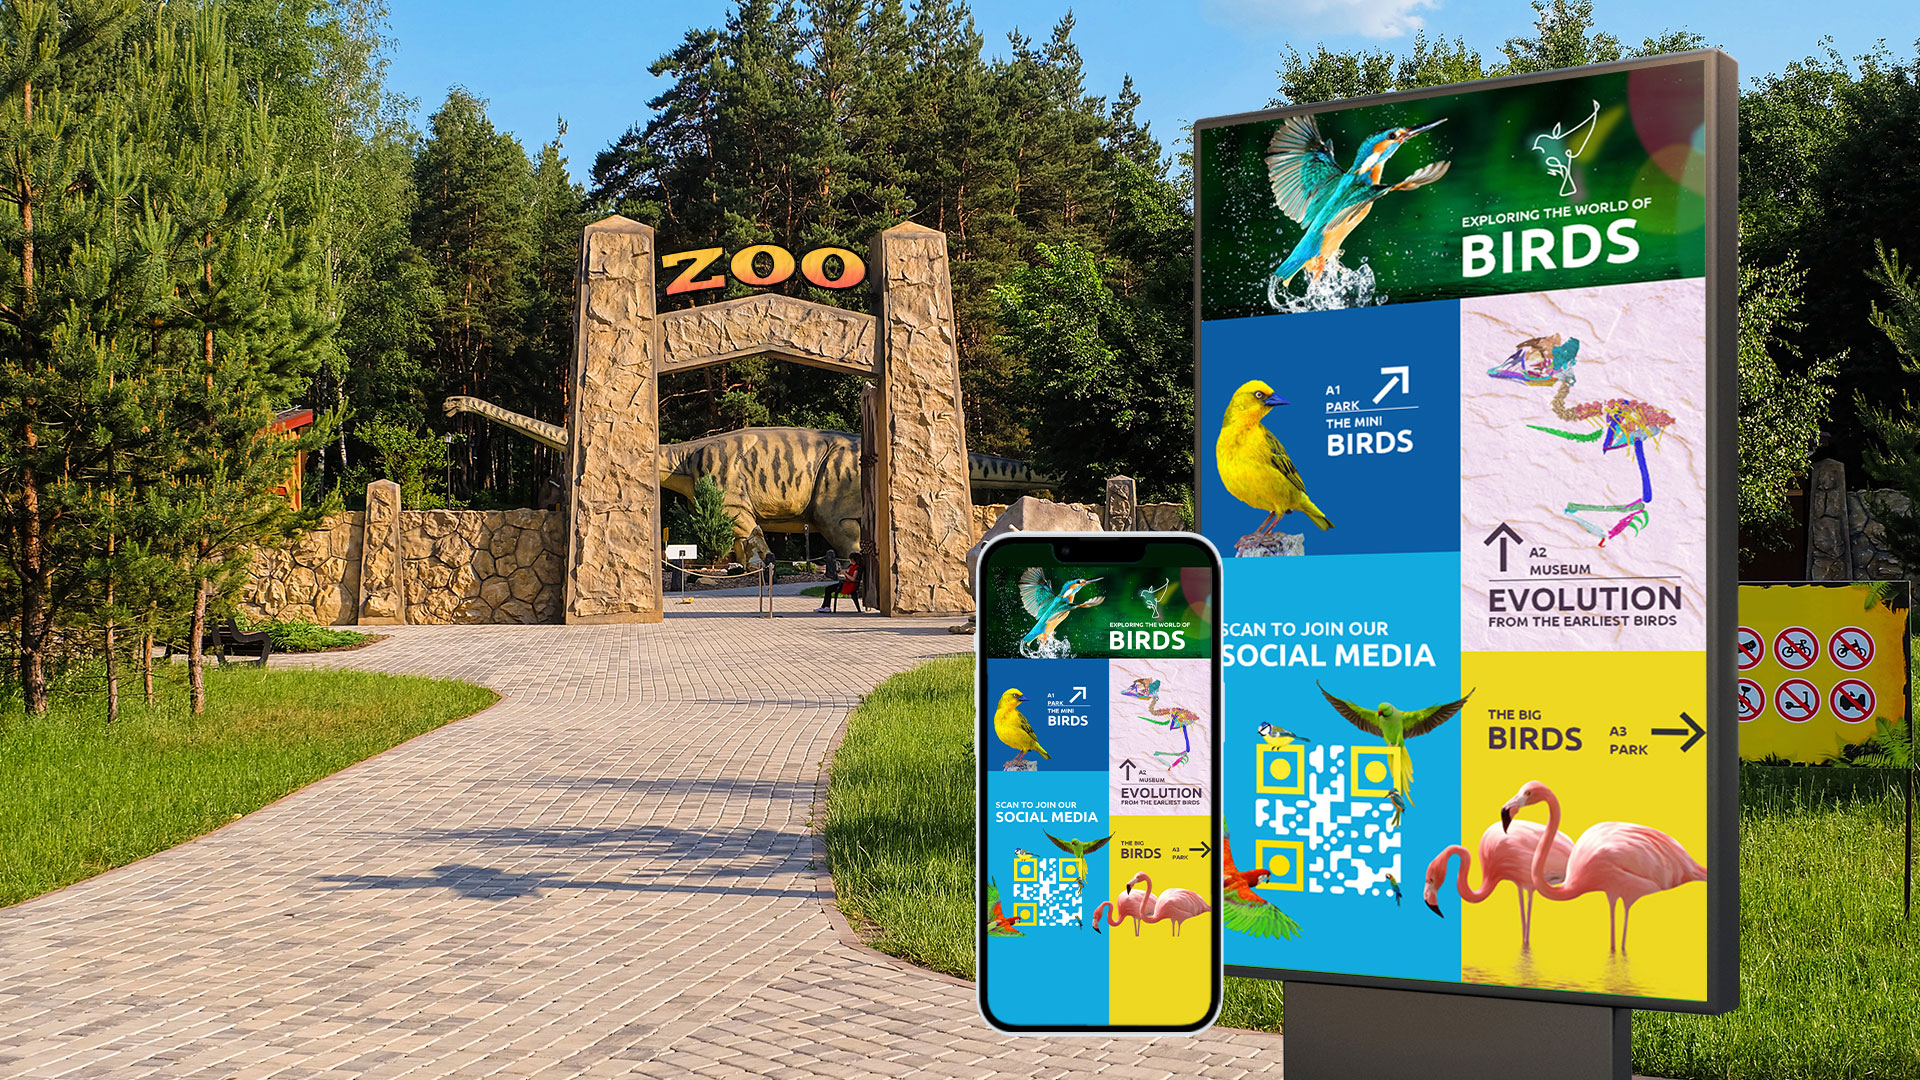 qr code, zoo, carry to mobile, outdoor digital signage